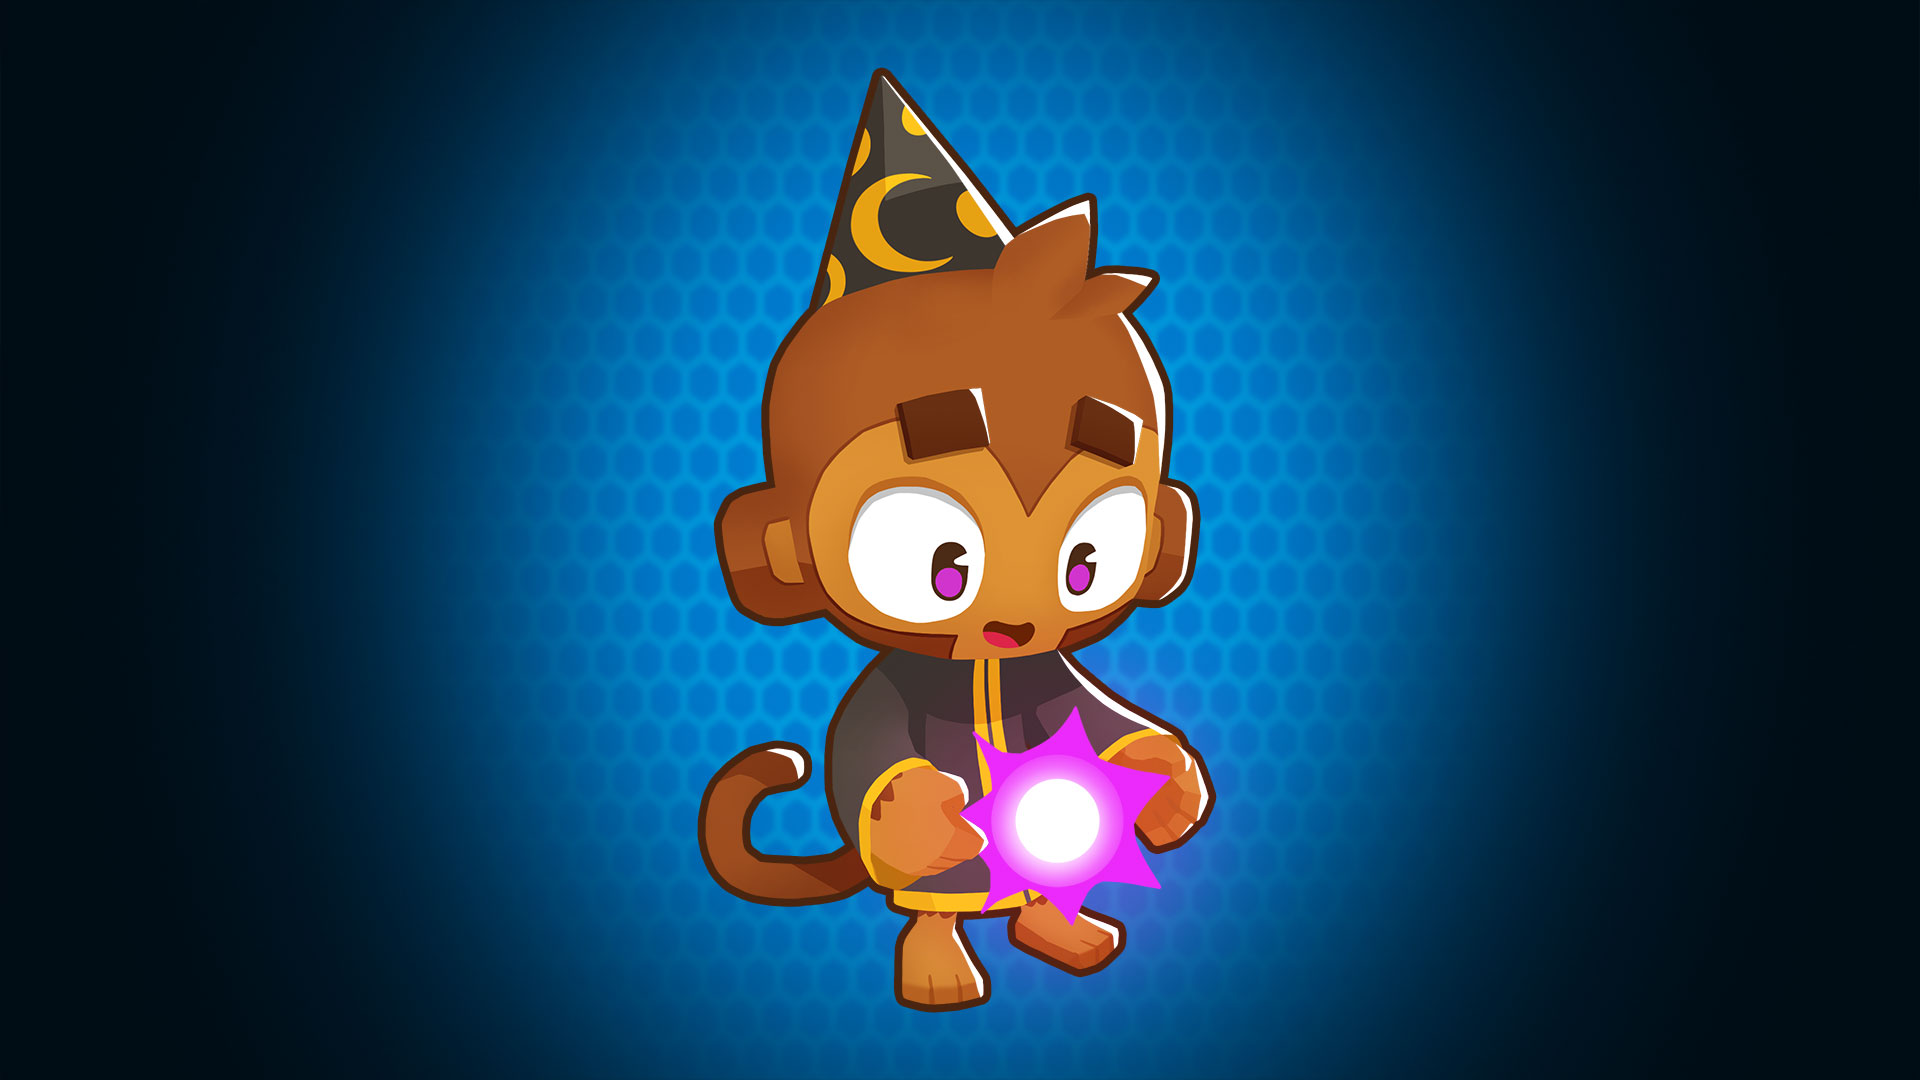 HD wallpaper of Bloons TD 6 wizard monkey character with magical orb on blue background for desktop.